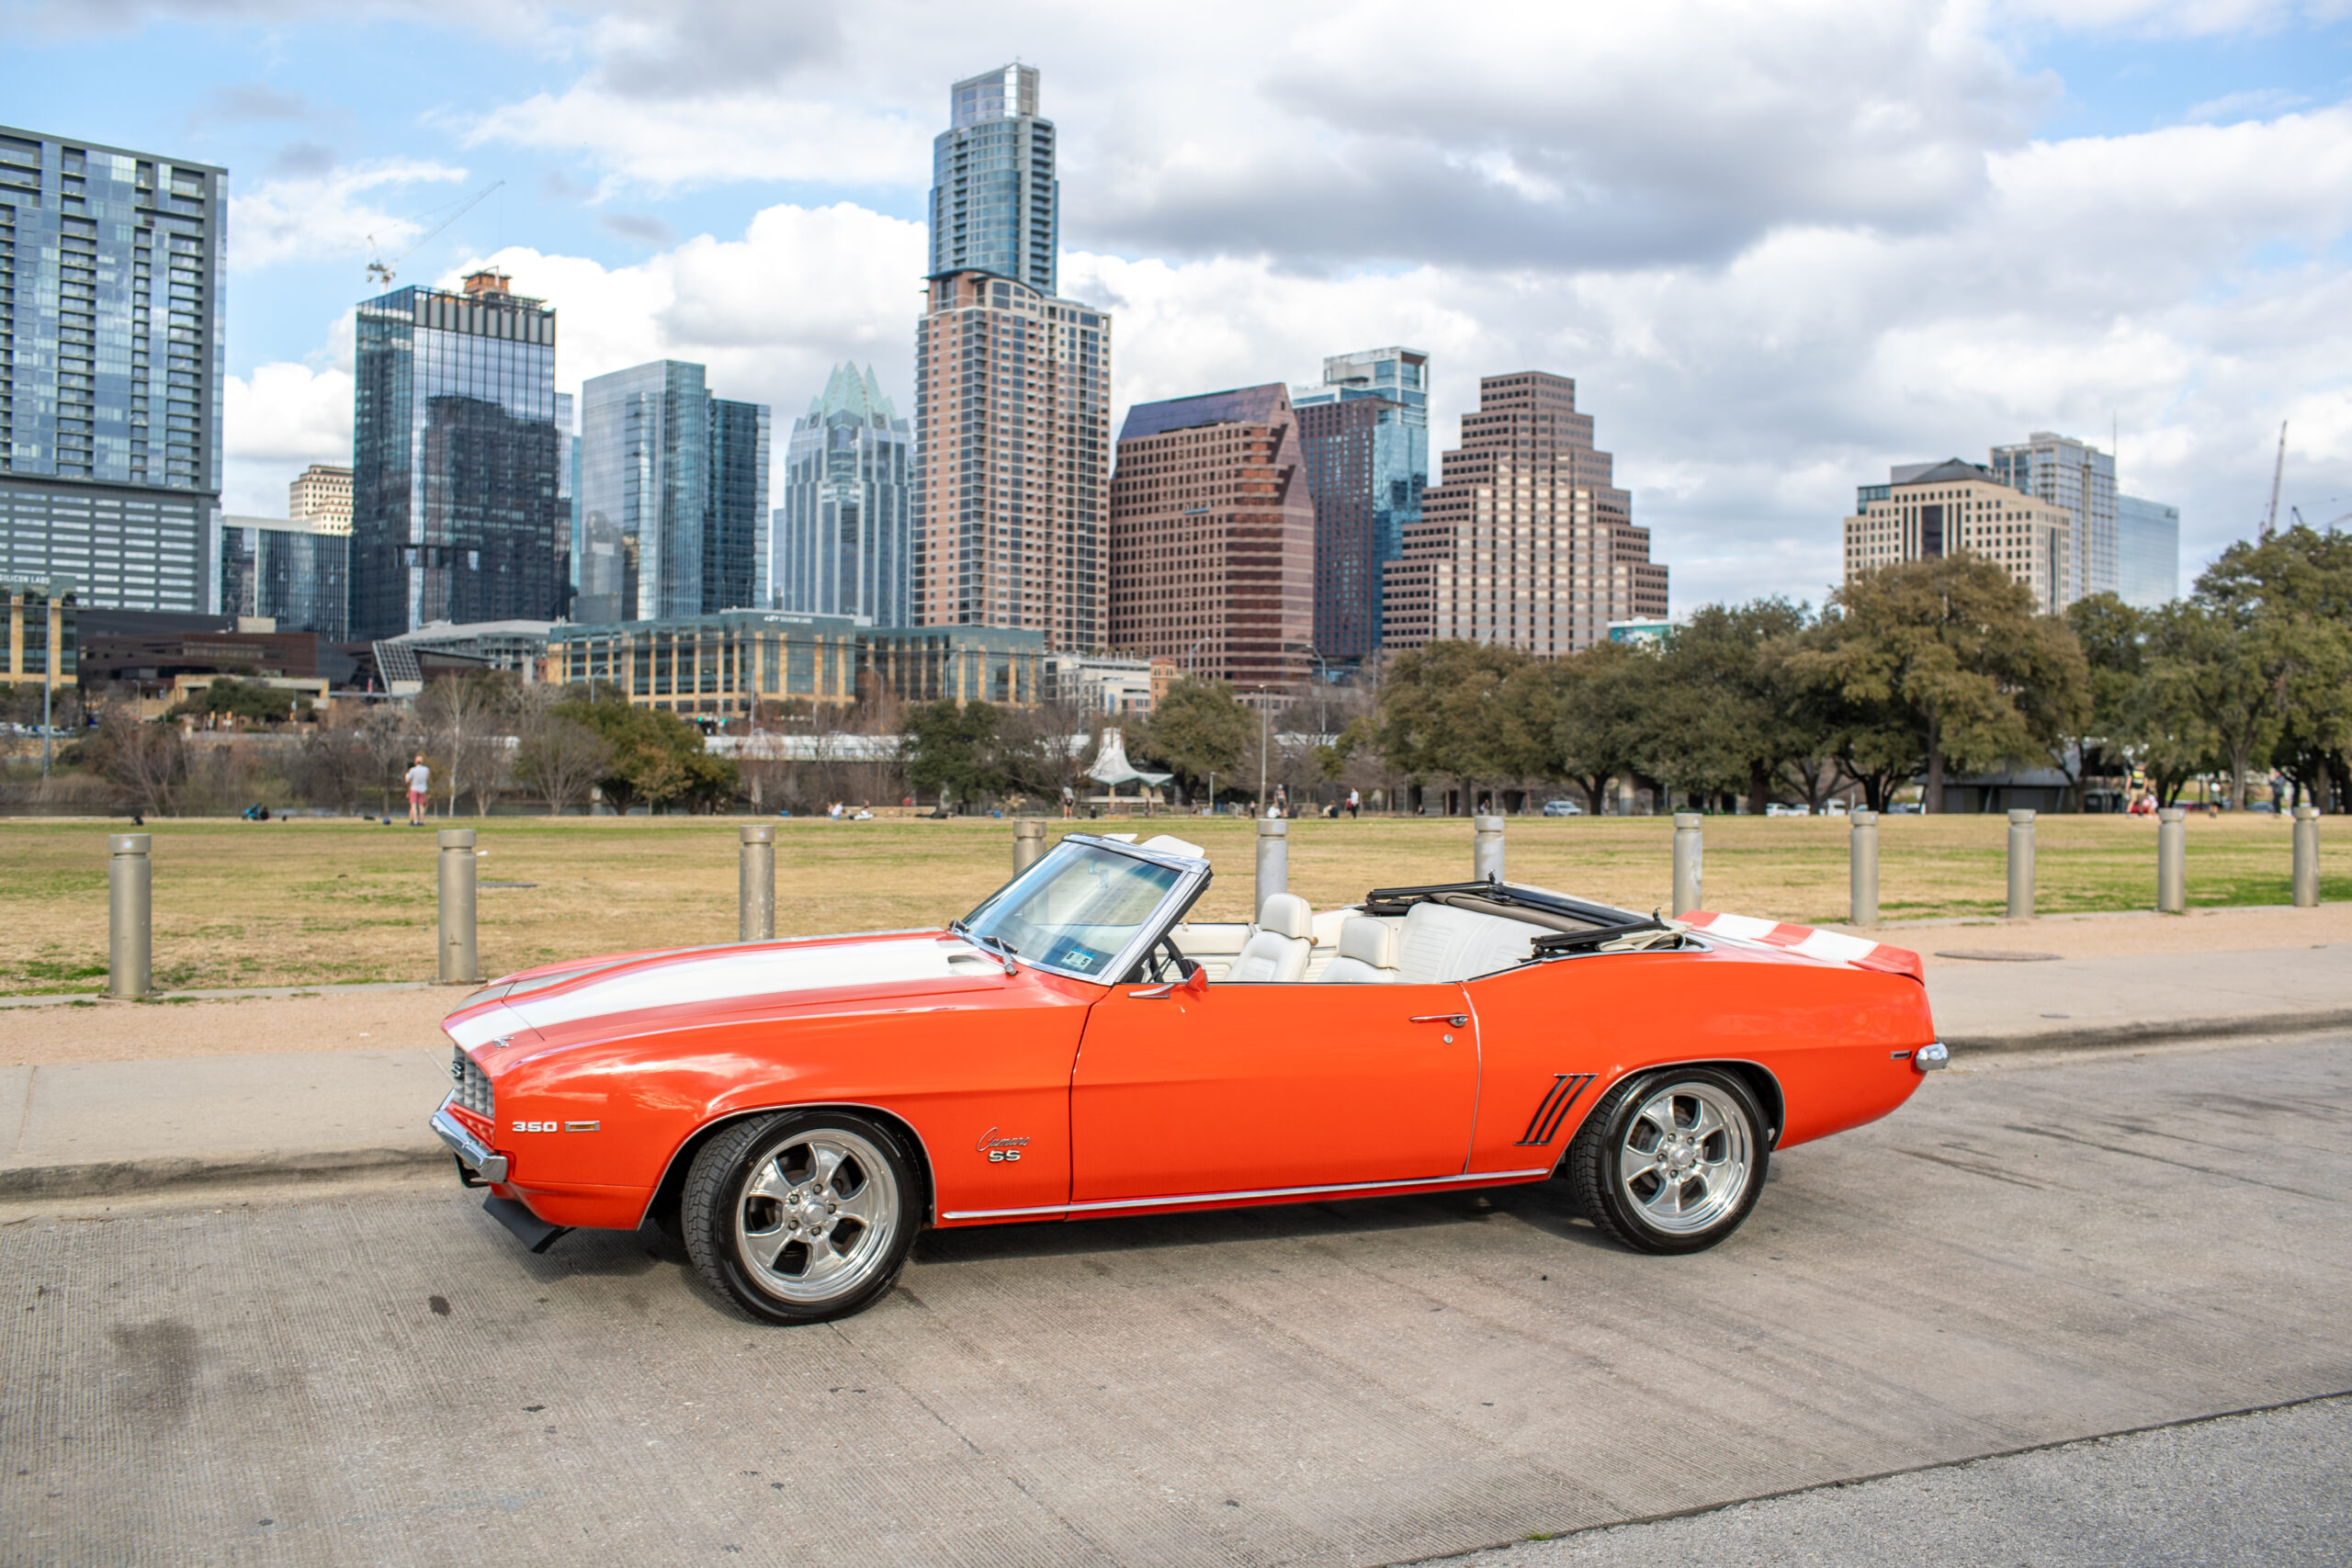 A bright orange convertible car parked near a grassy area with a city's skyline featuring several tall buildings in the background.